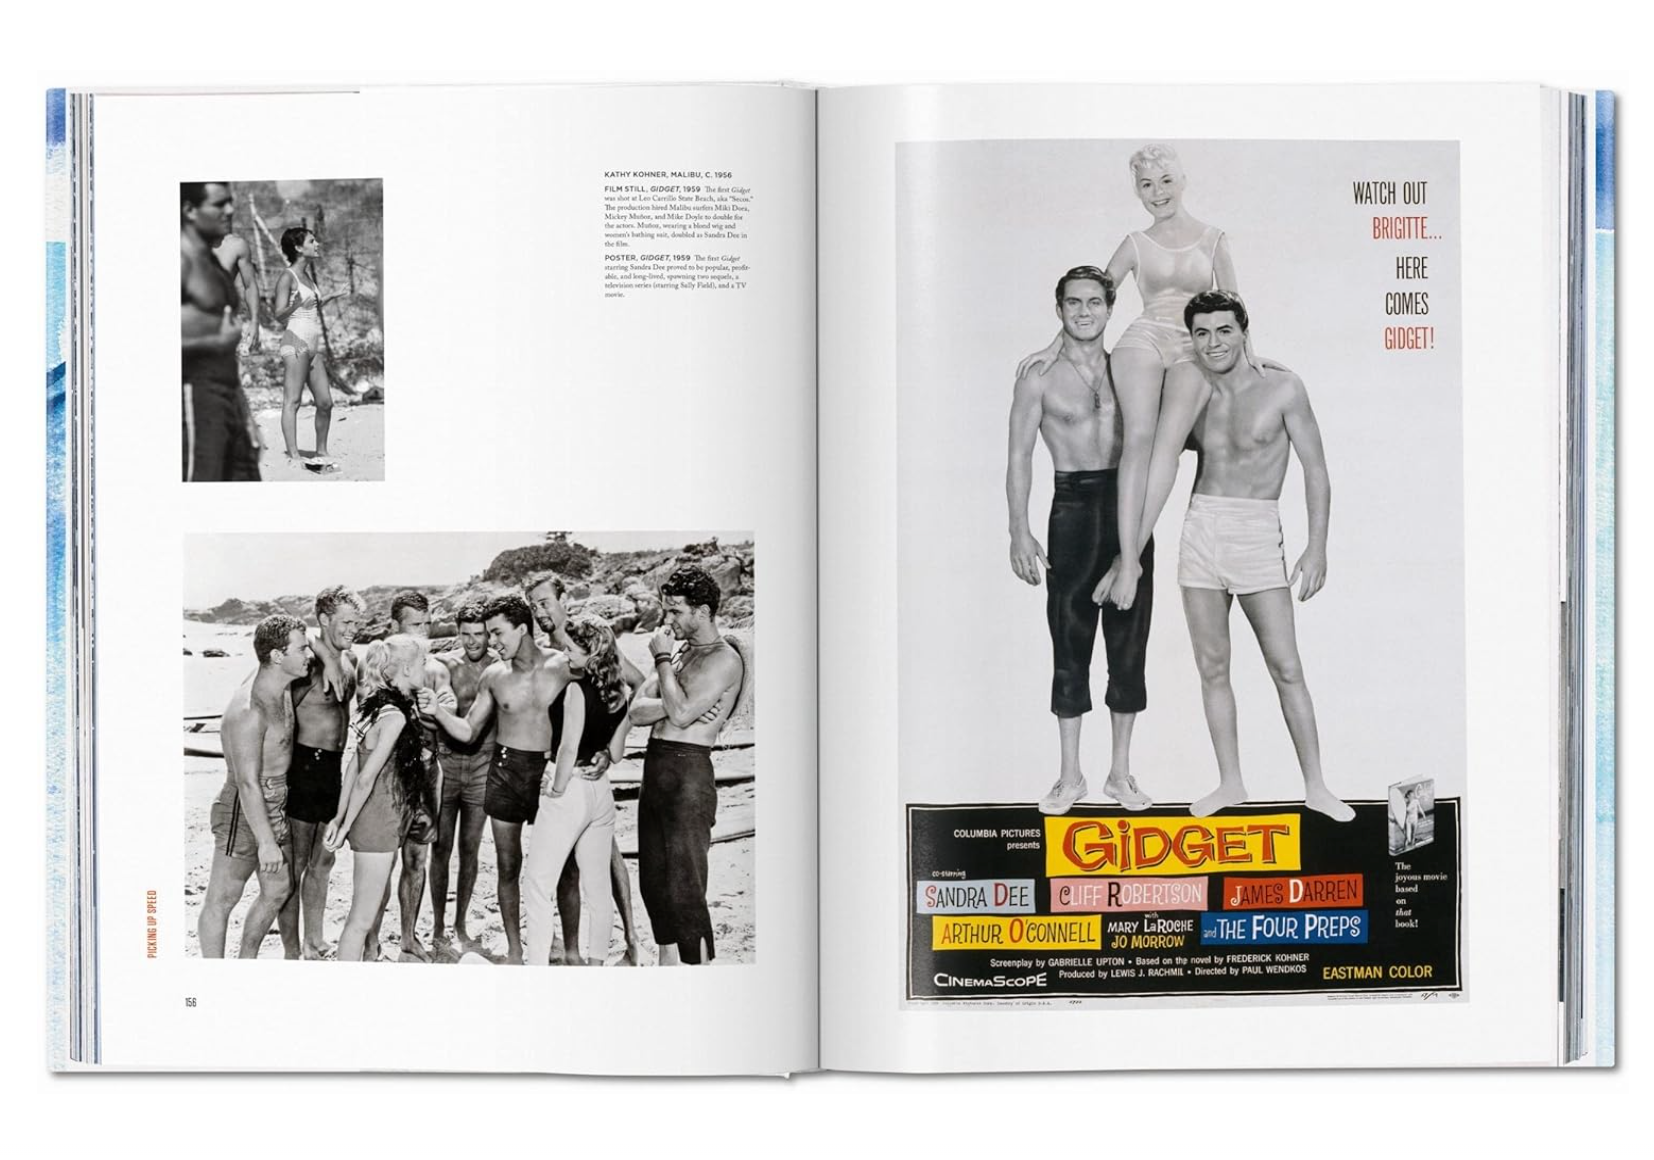 Open Breitling Book of Surfing displaying two pages; left page features historical black-and-white photos of people at a beach in Scottsdale, Arizona and some text, while the right page shows a vintage movie poster for the film "Gidget.